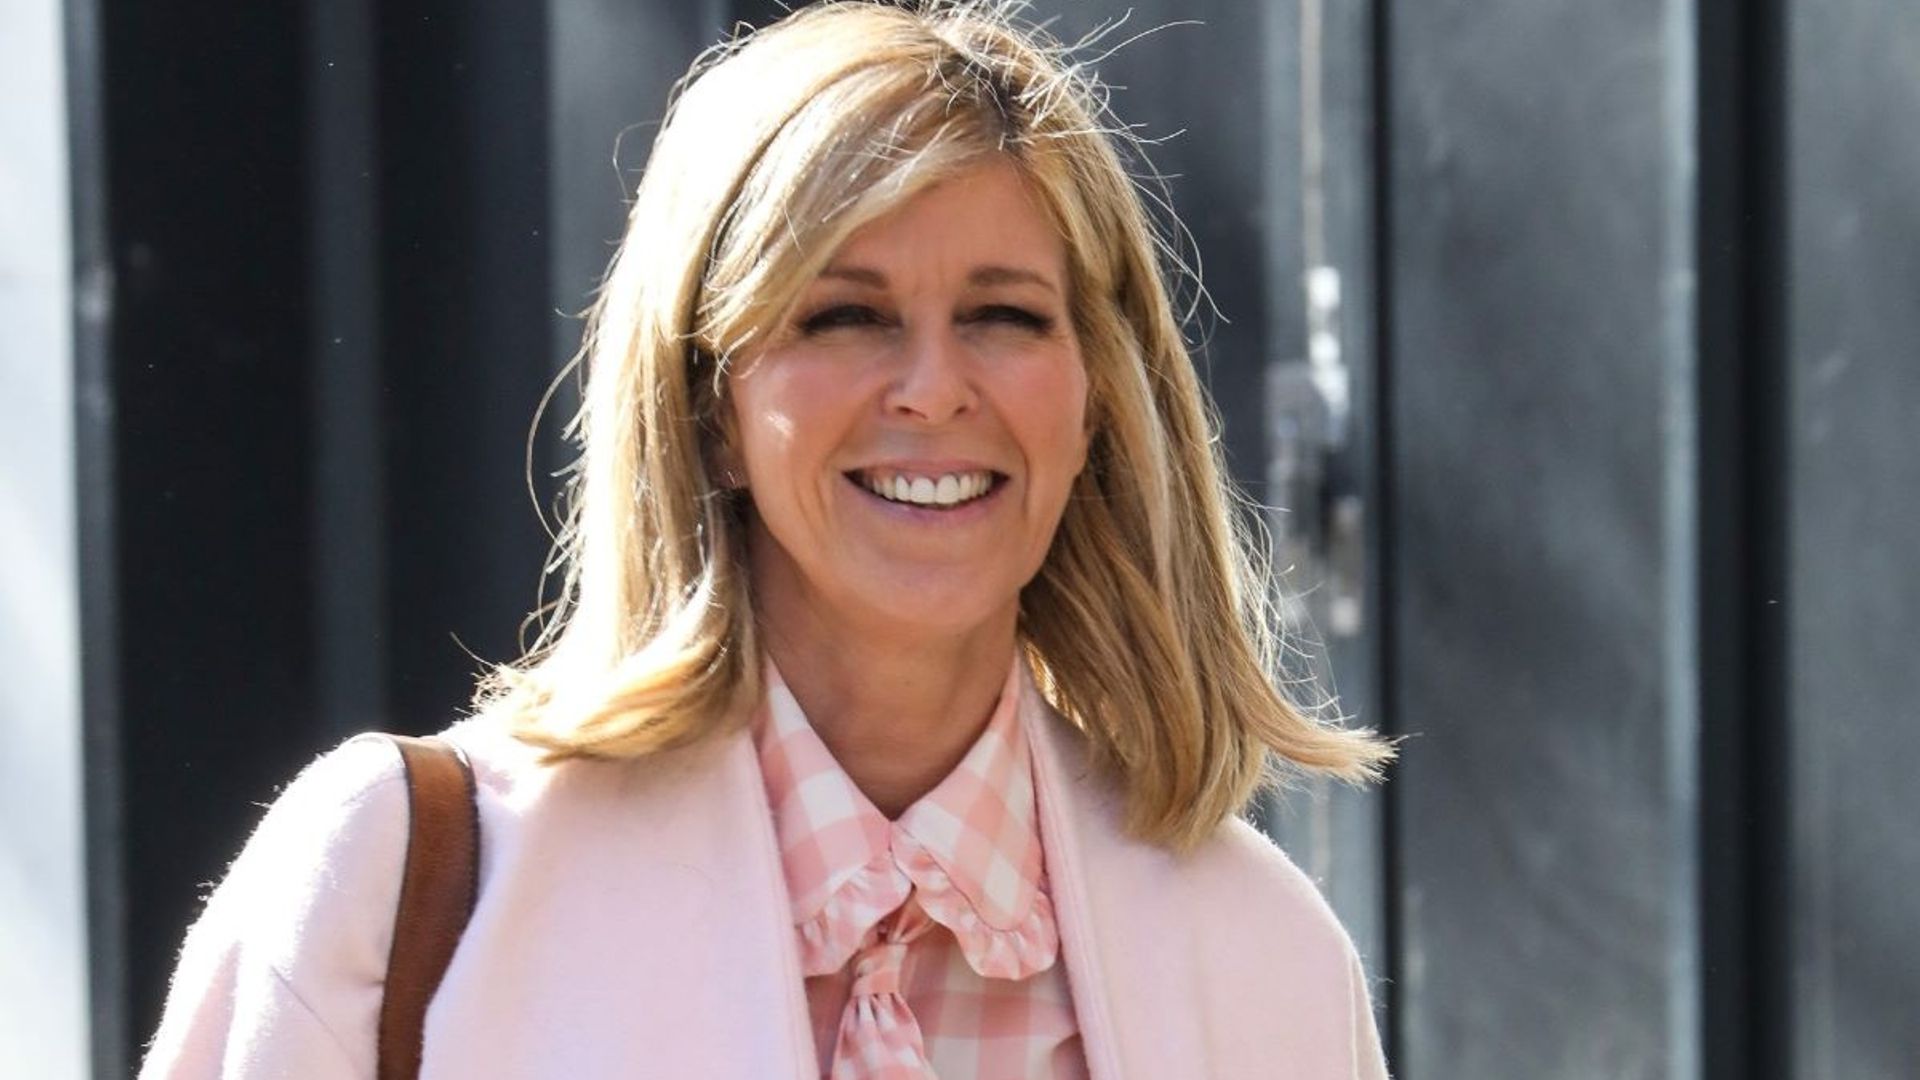 Kate Garraway shows off her 'happy place' at home as she talks about husband Derek's recovery